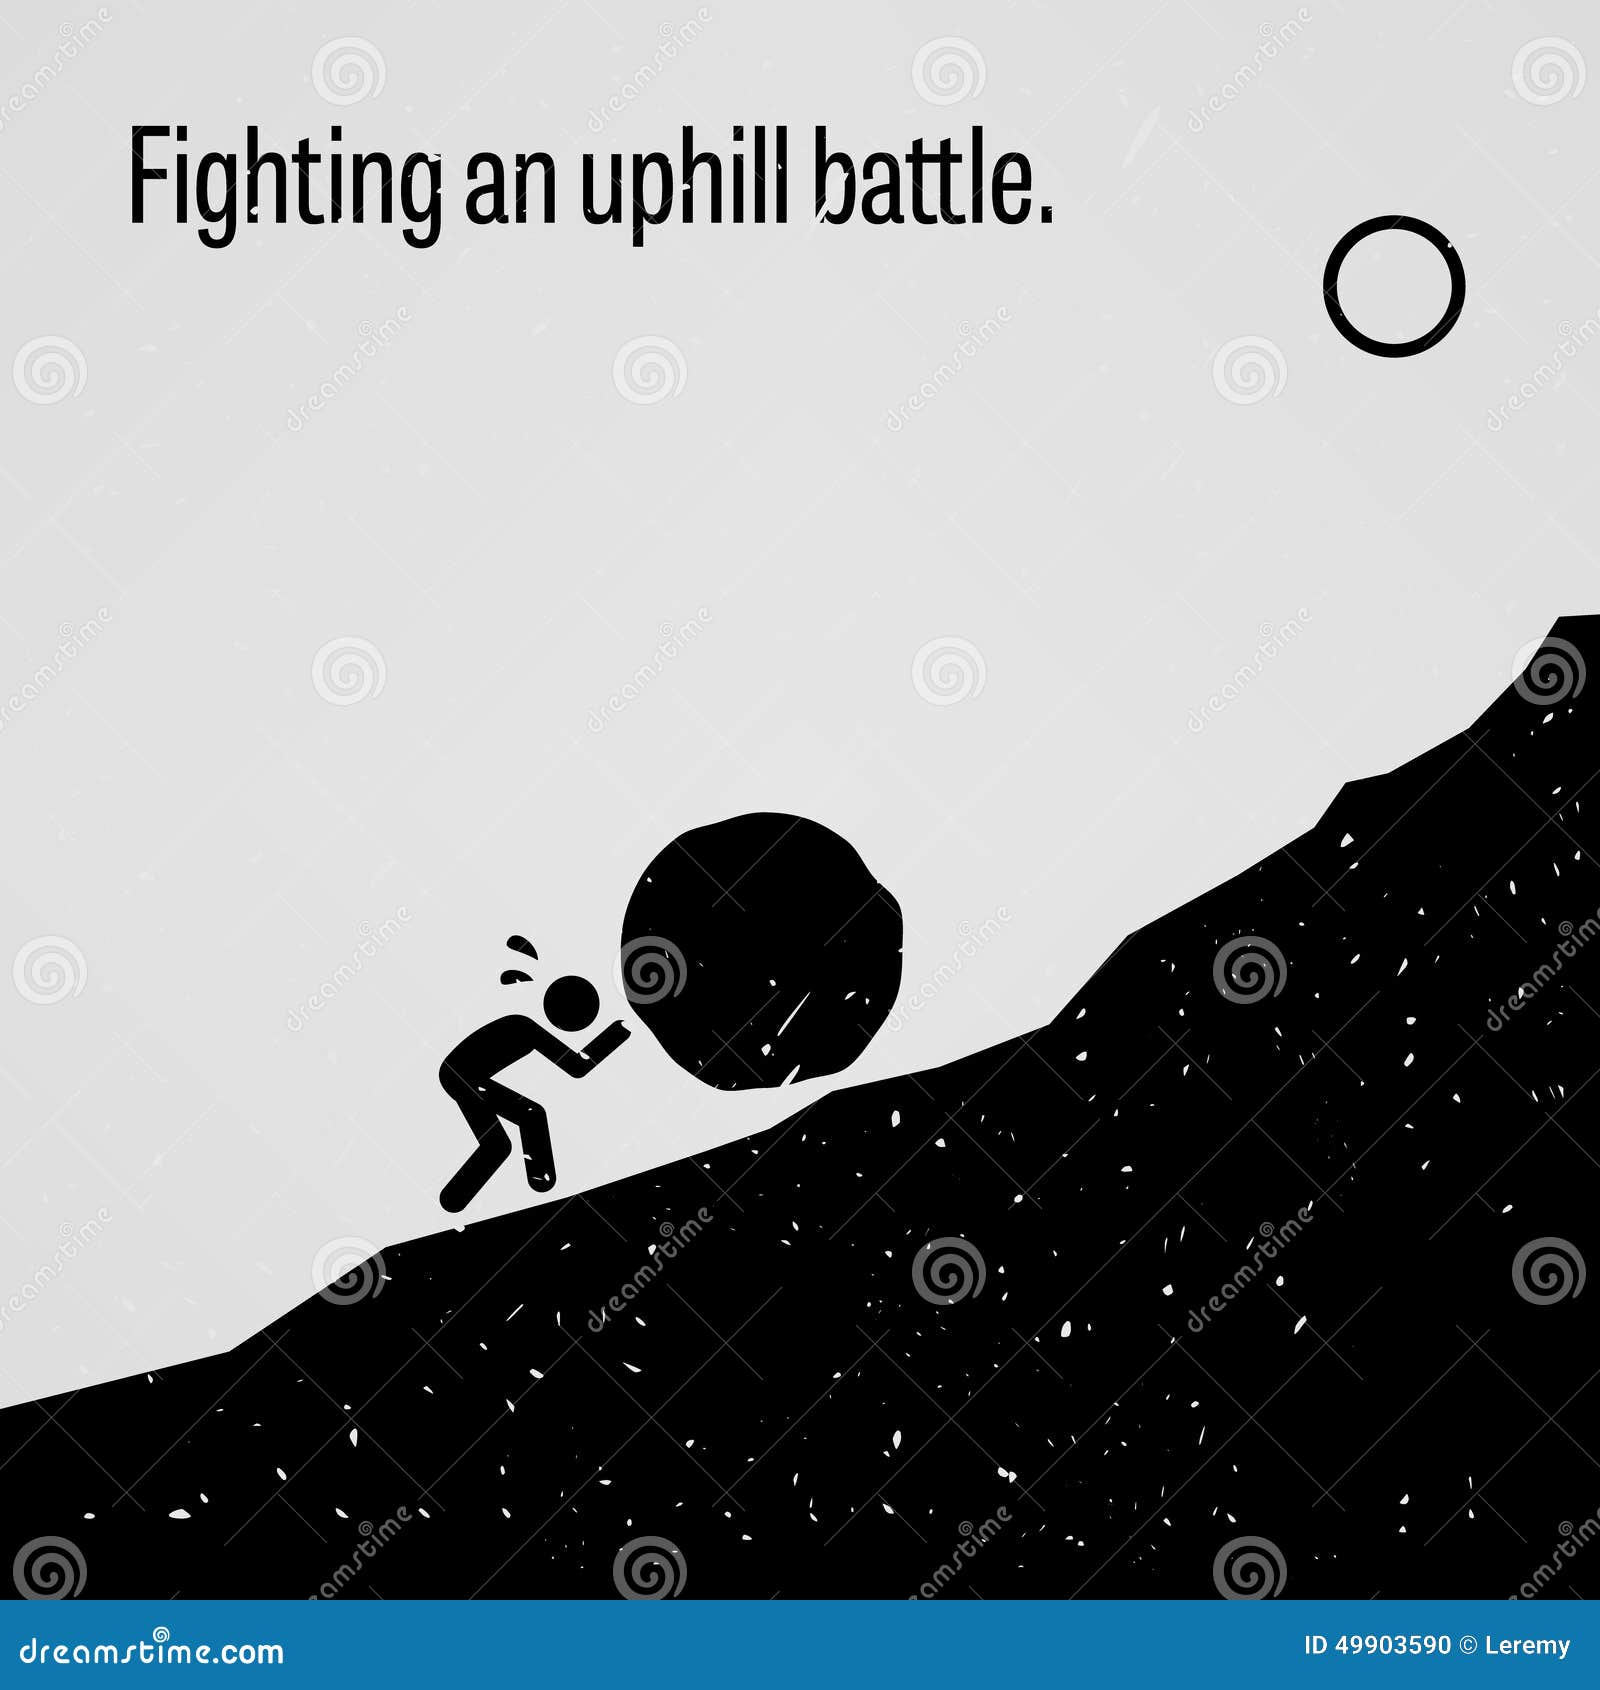 fighting-uphill-battle-proverb-motivational-inspirational-poster-representing-sayings-simple-human-pictogram-49903590.jpg